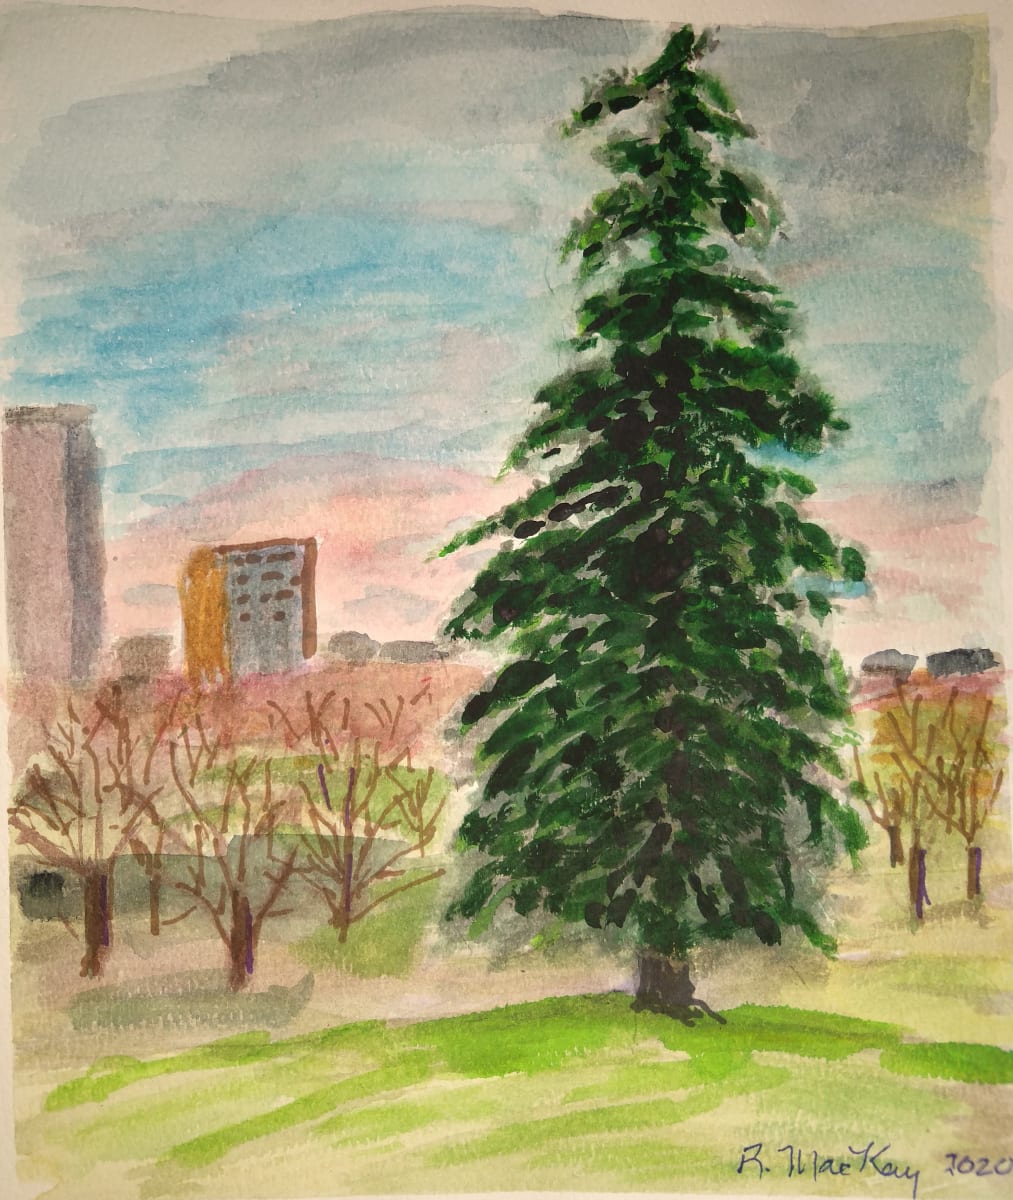 Colorado Spruce Weeping over the city by Rhondda MacKay  Image: I started this painting in the early months of the COVID pandemic and revisited it after an occupation of downtown Ottawa in 2022, putting it under a more compicated sky.